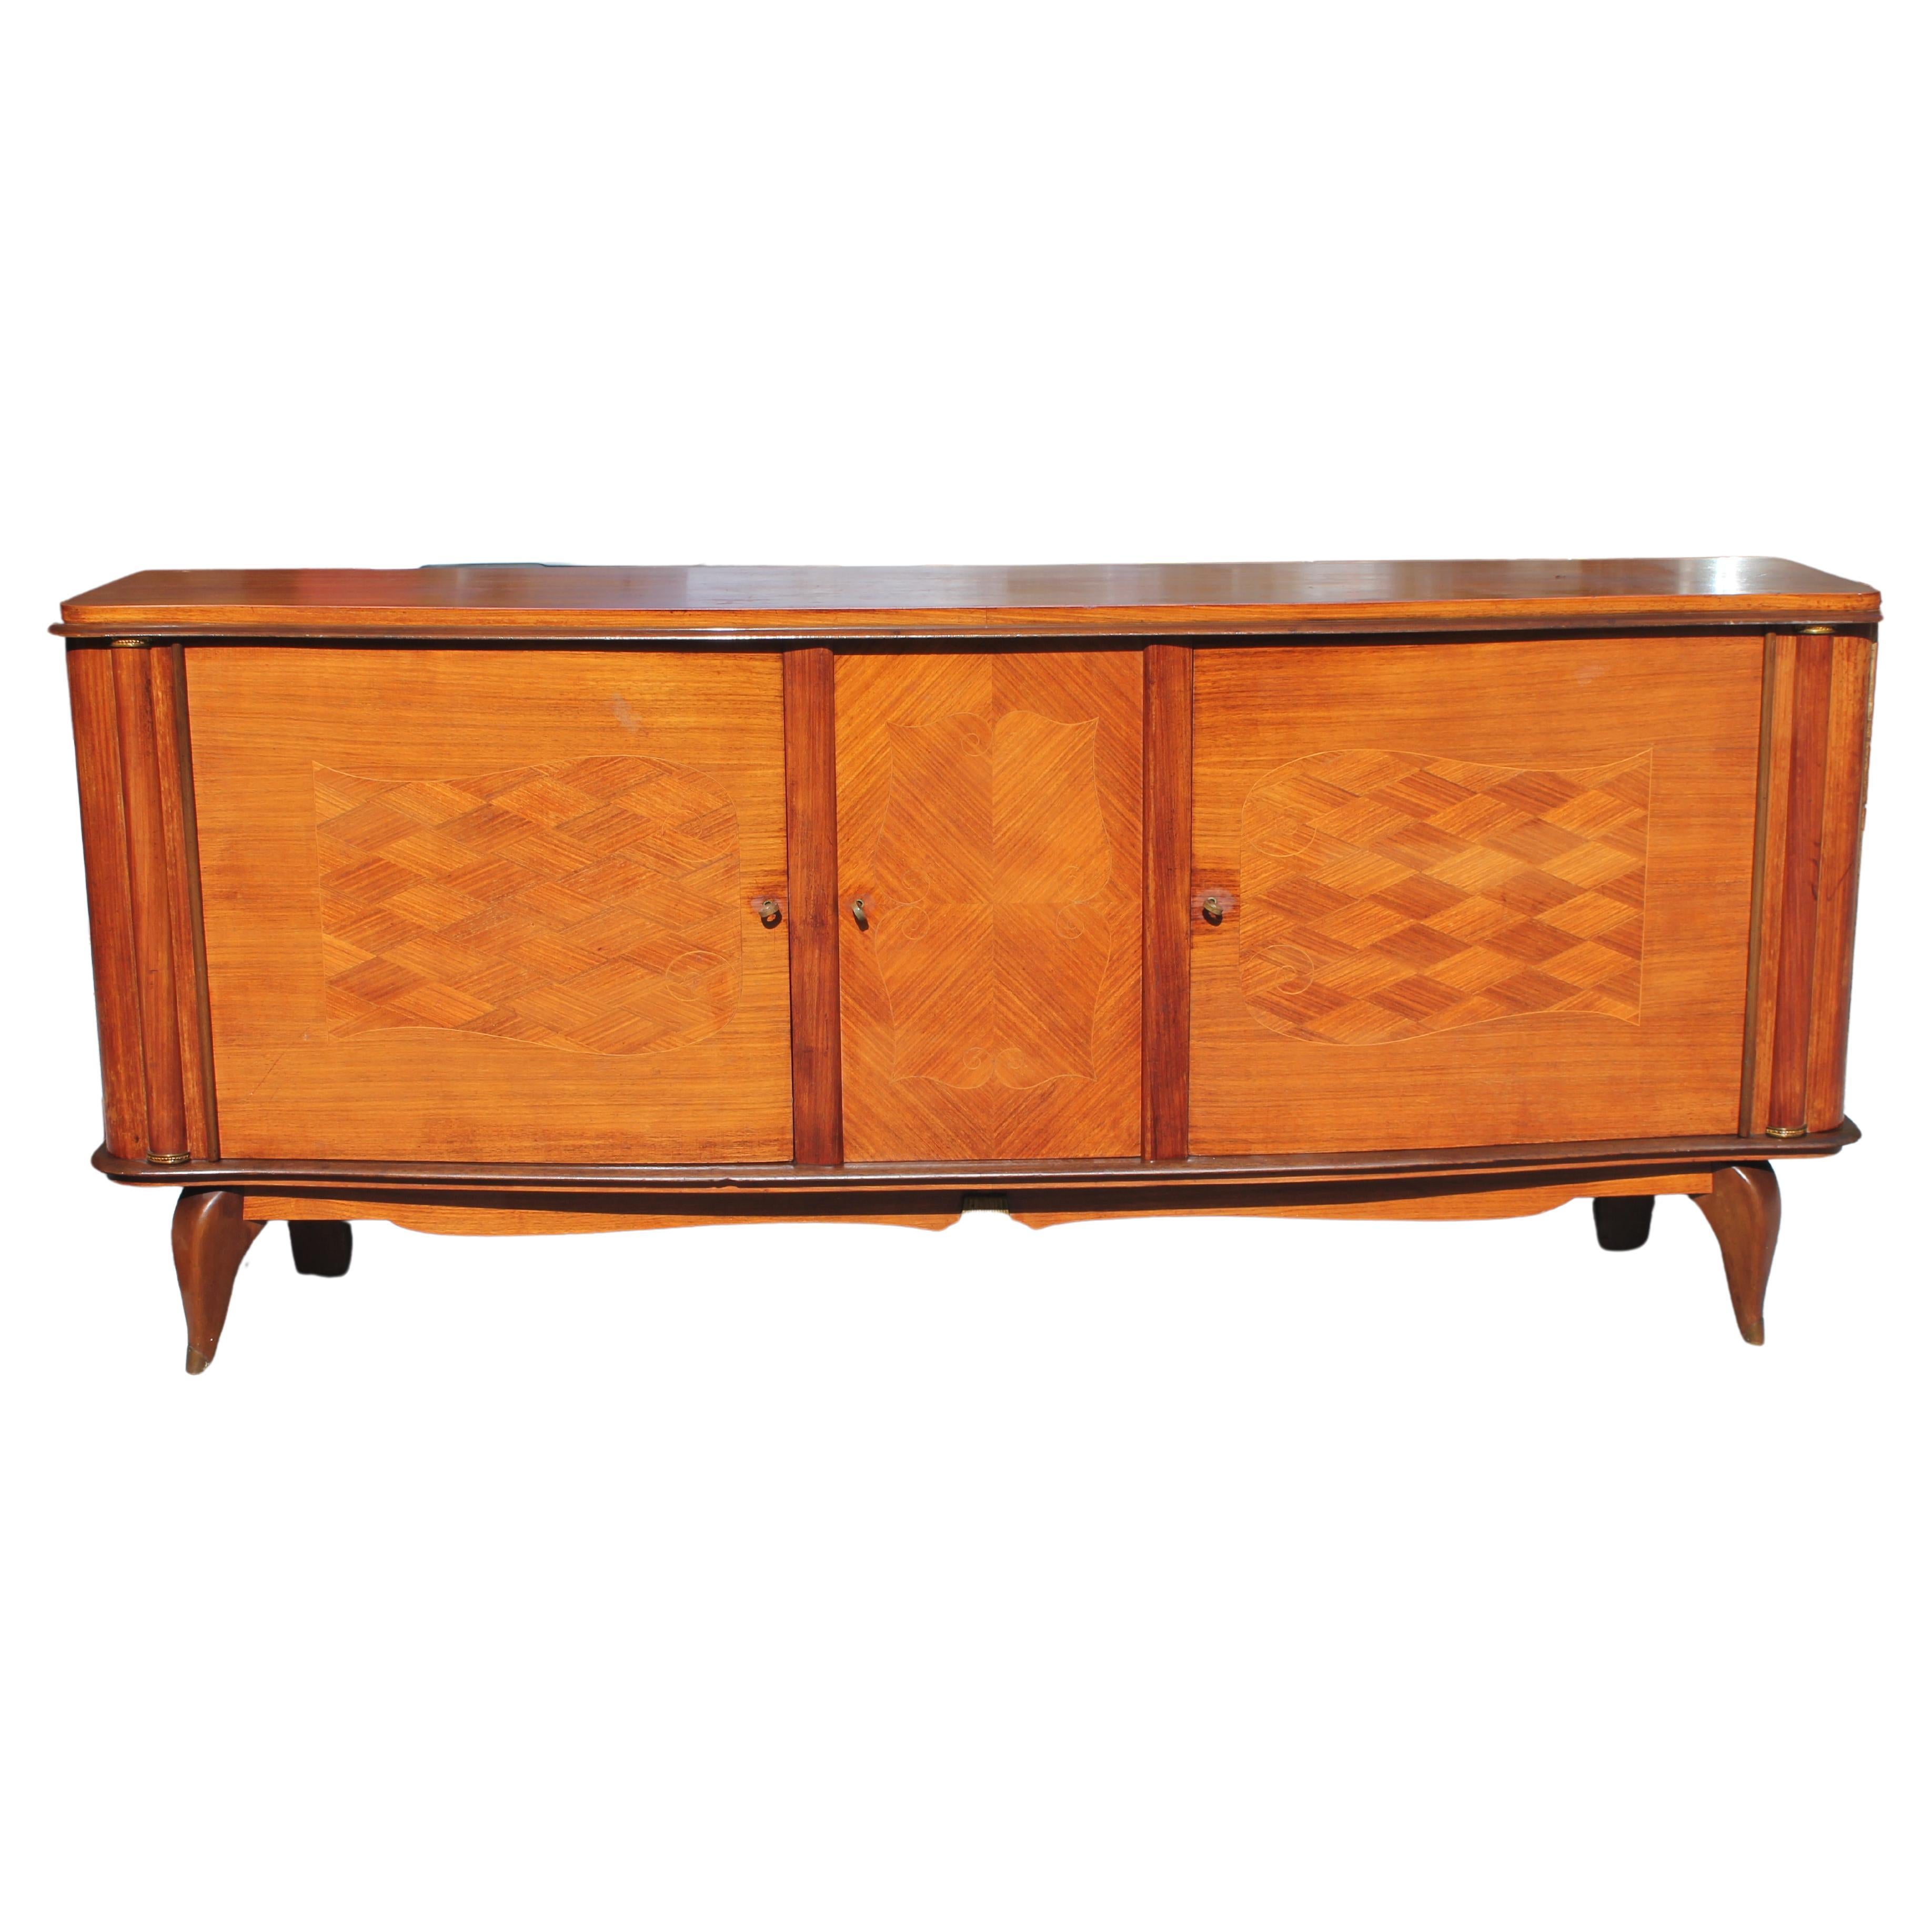 Classic 1940's French Art Deco Palisander Buffet / Sideboard Style Jules Leleu For Sale